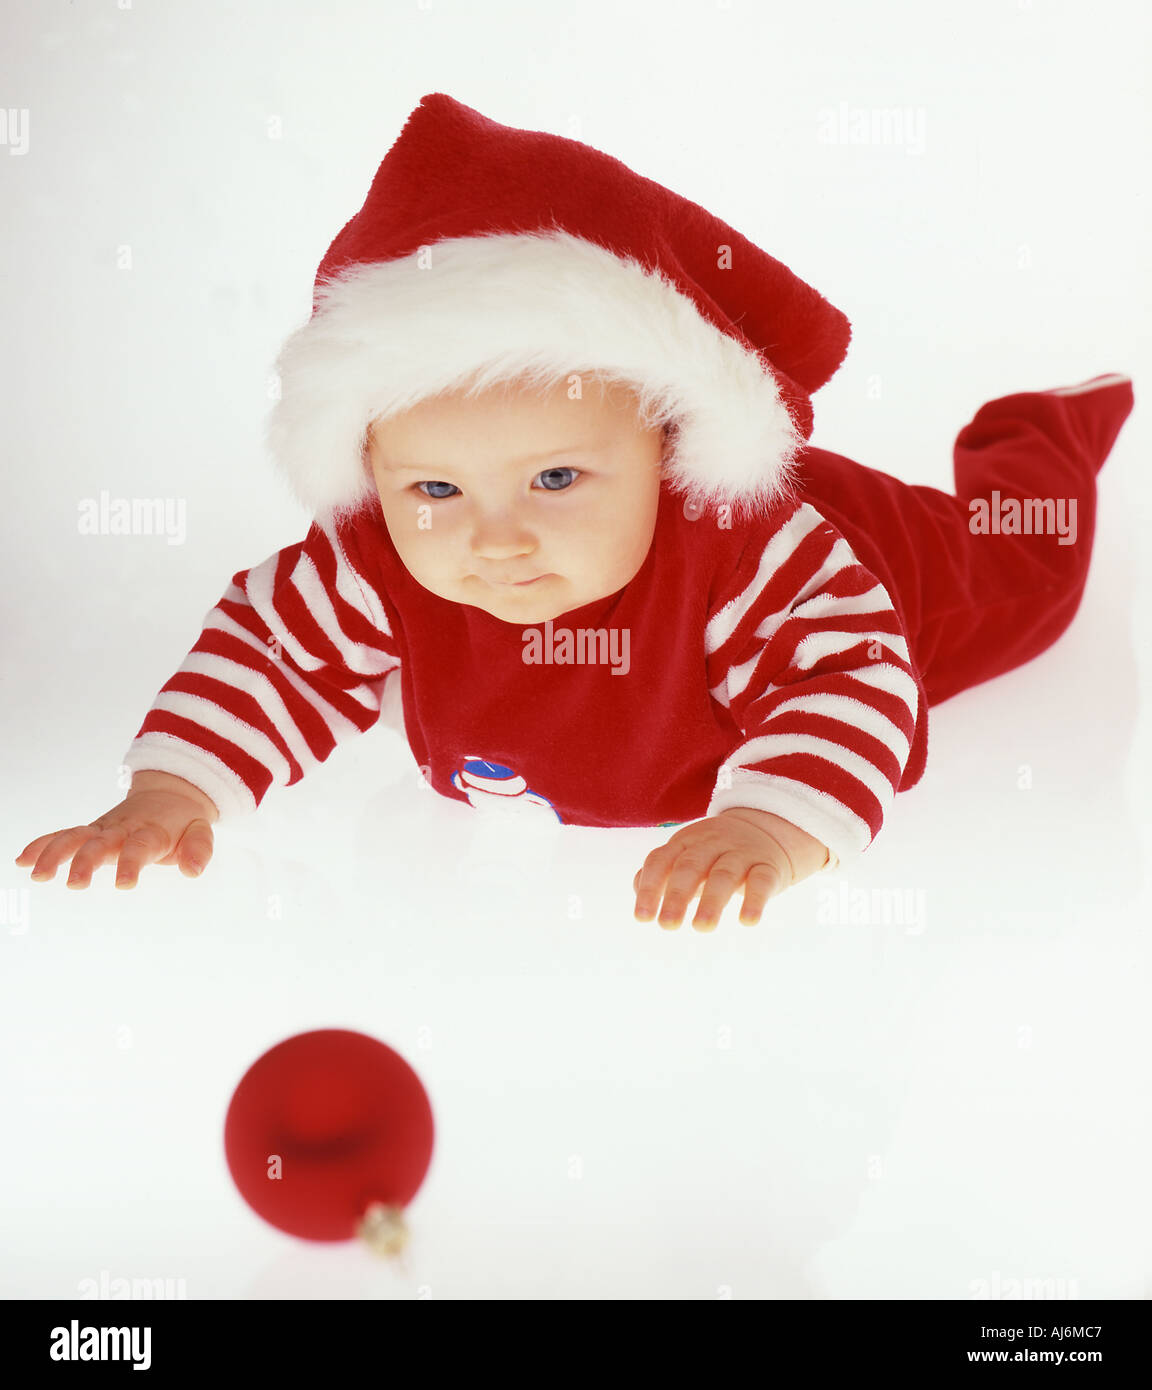 Baby in Santa Claus hat. Banque D'Images